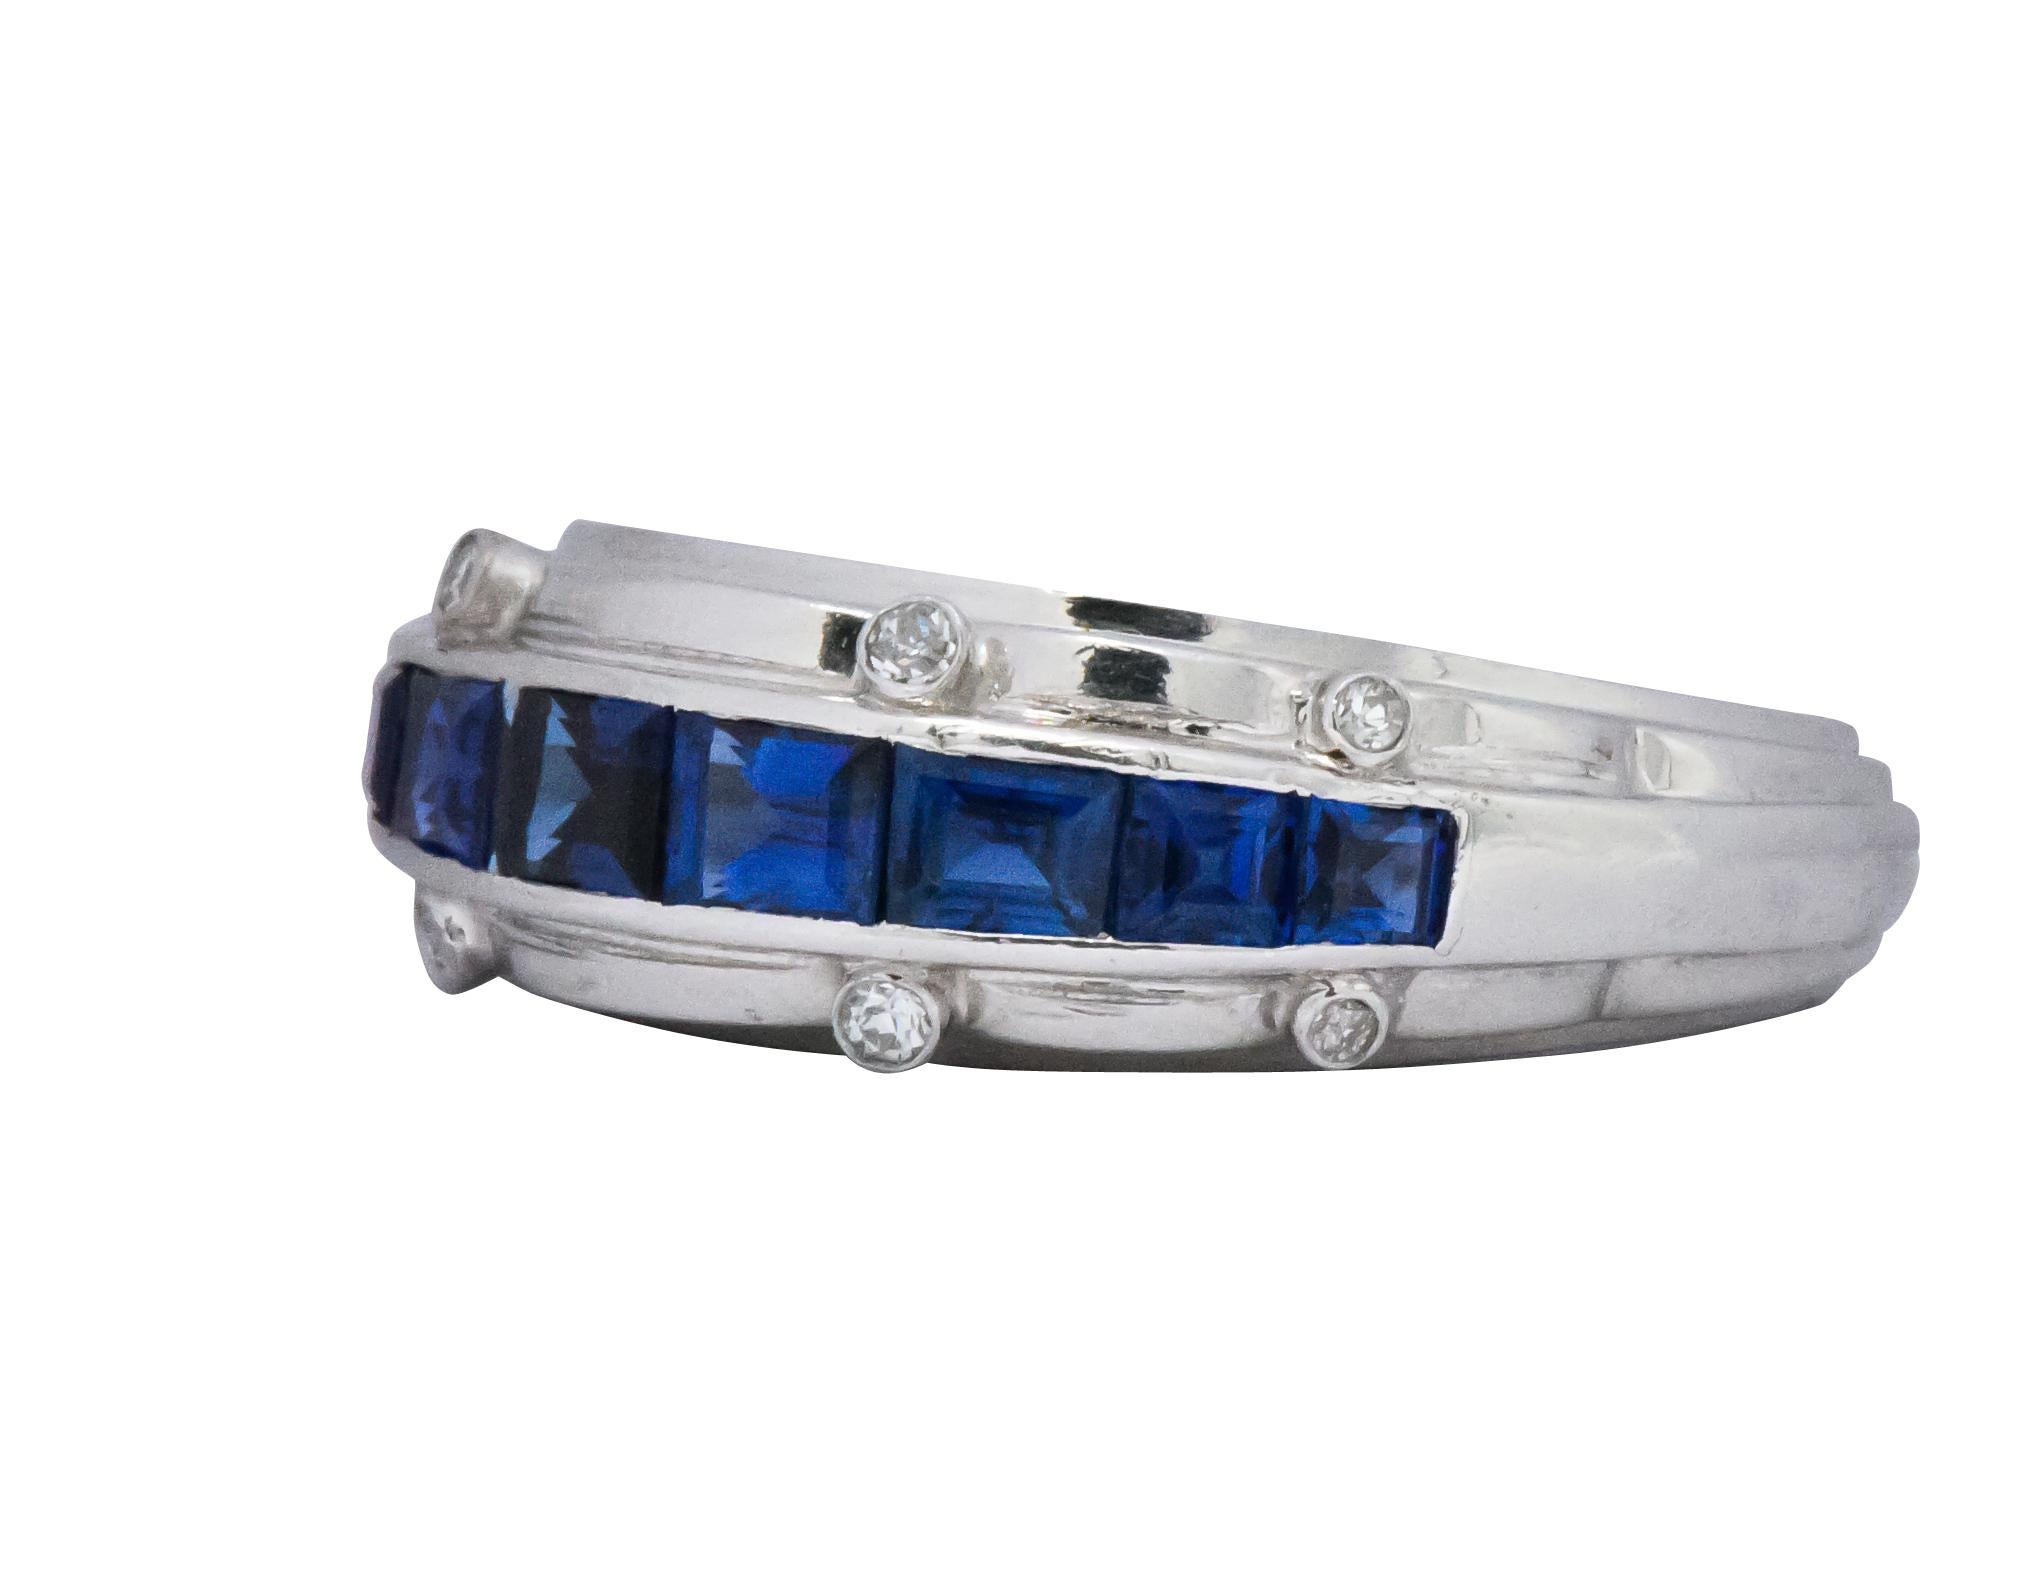 Tiffany & Co. 1940’s platinum sapphire and diamond ring.  9 rich and beautifully matched channel set rectangular cut blue sapphires weighing approximately  2.50 carat total

Accenting the channel set sapphires are 8 bezel set clean white single cut